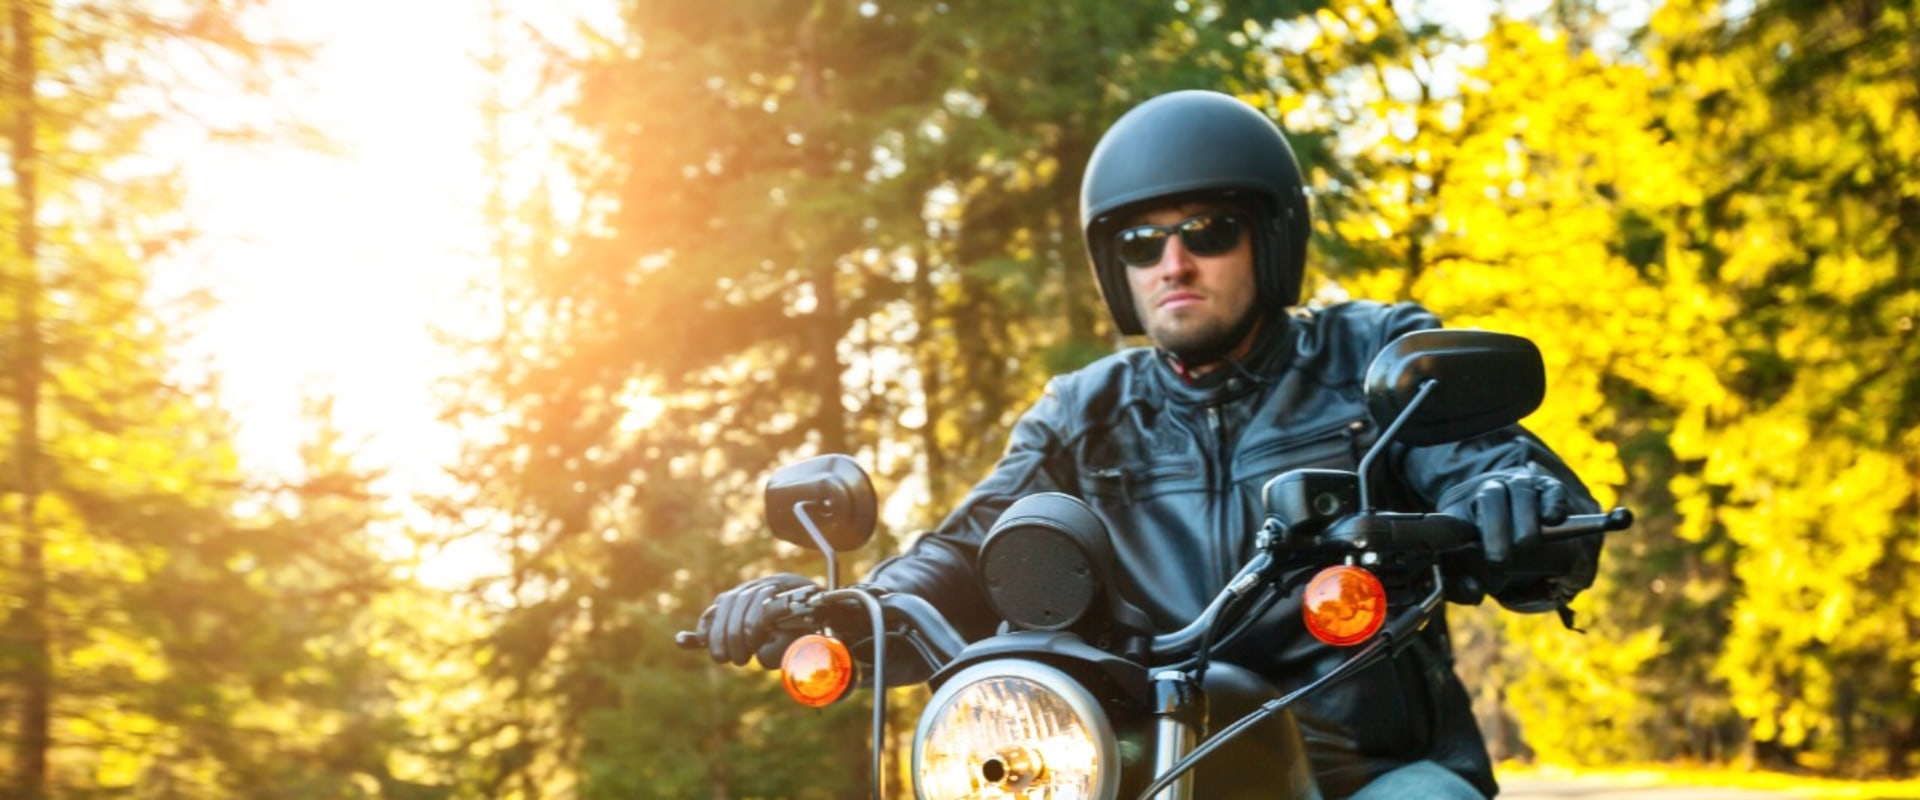 Family-Friendly Motorcycle Insurance for New Owners